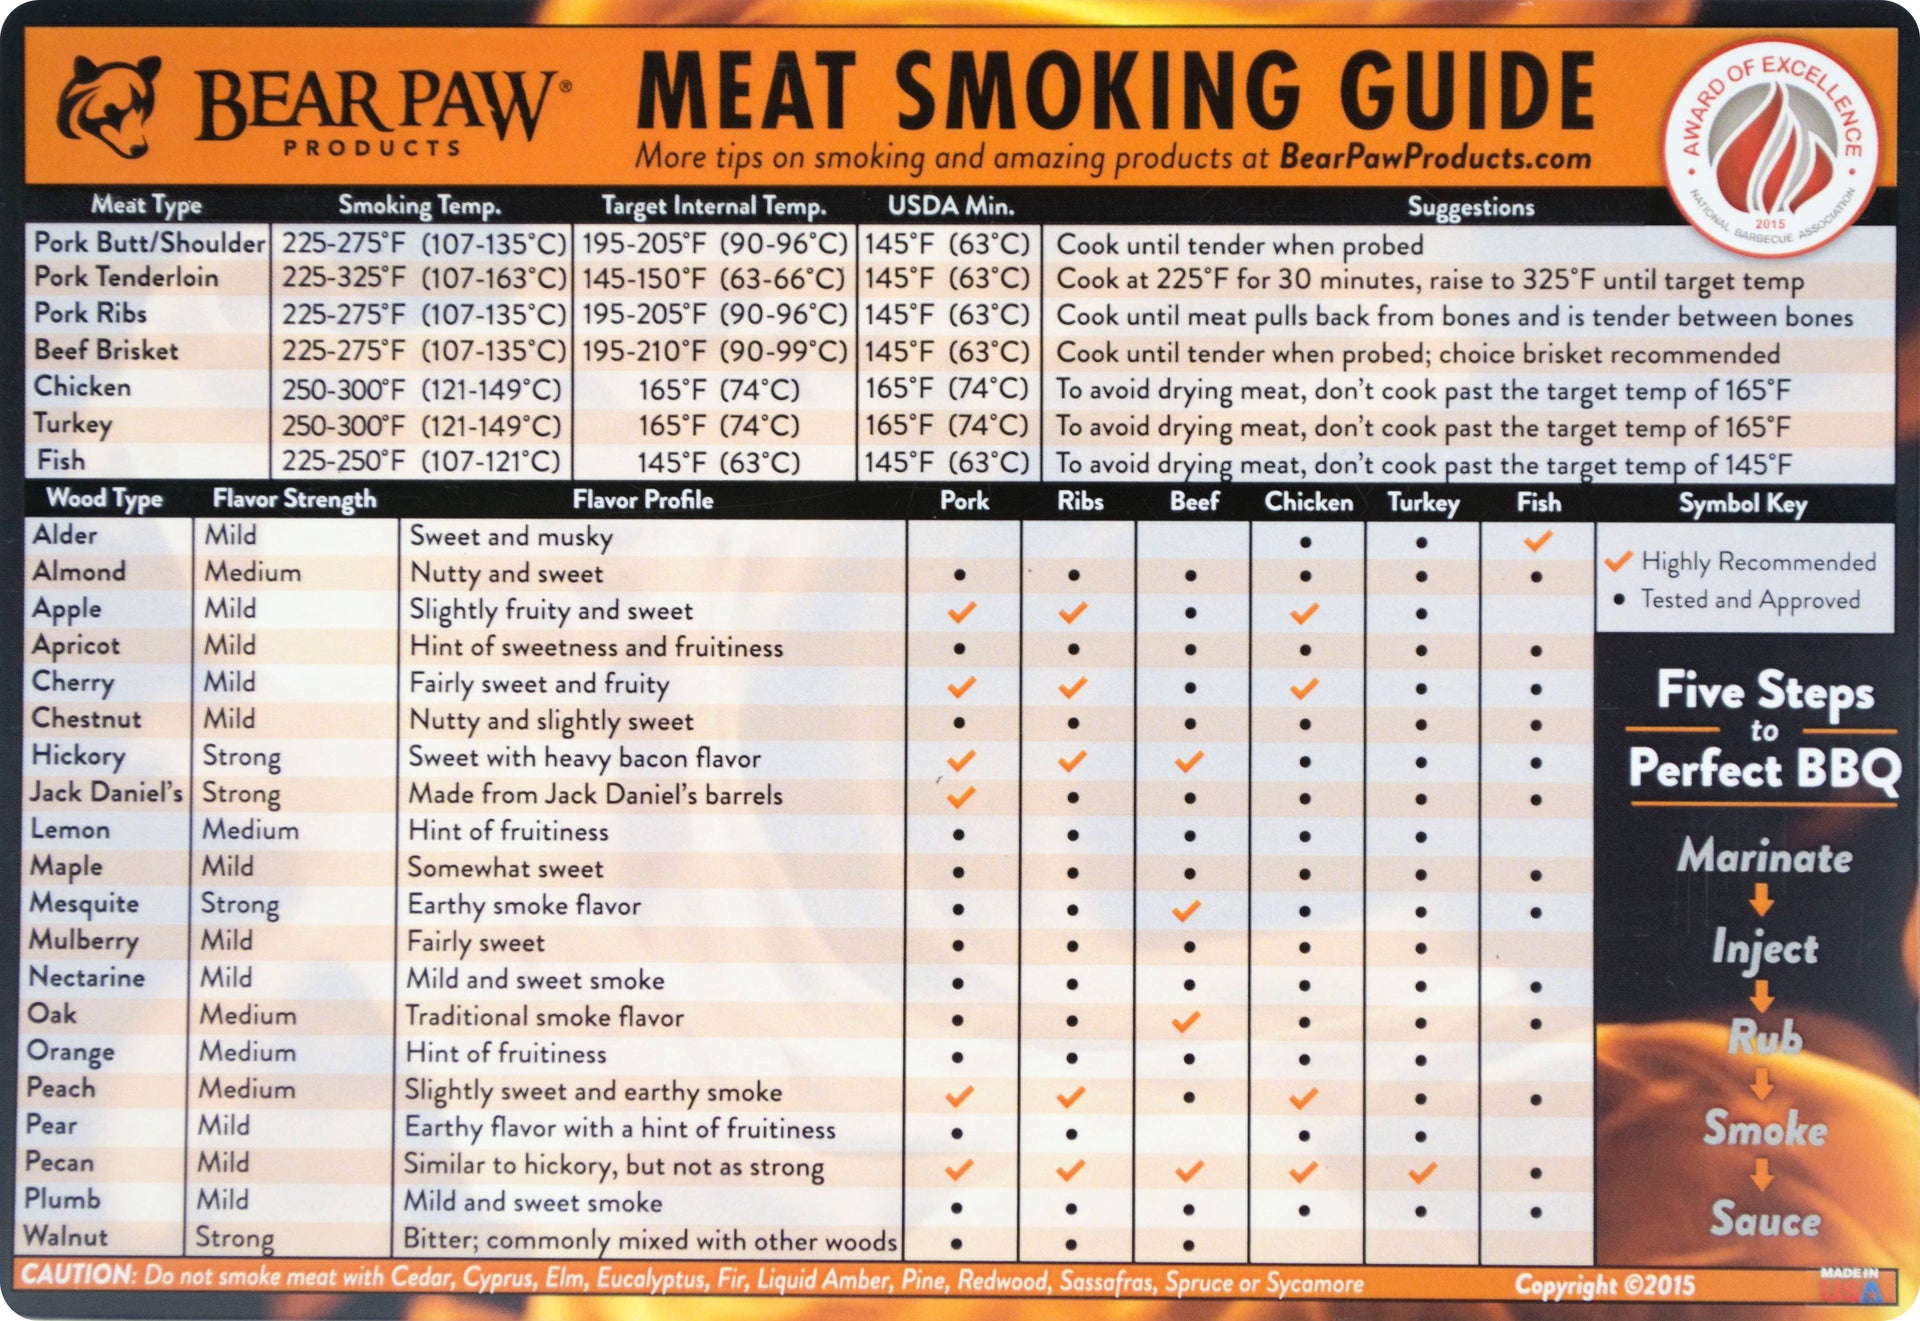 9 Tips To Smoking Meat Any Prepper Should Know - Survivopedia